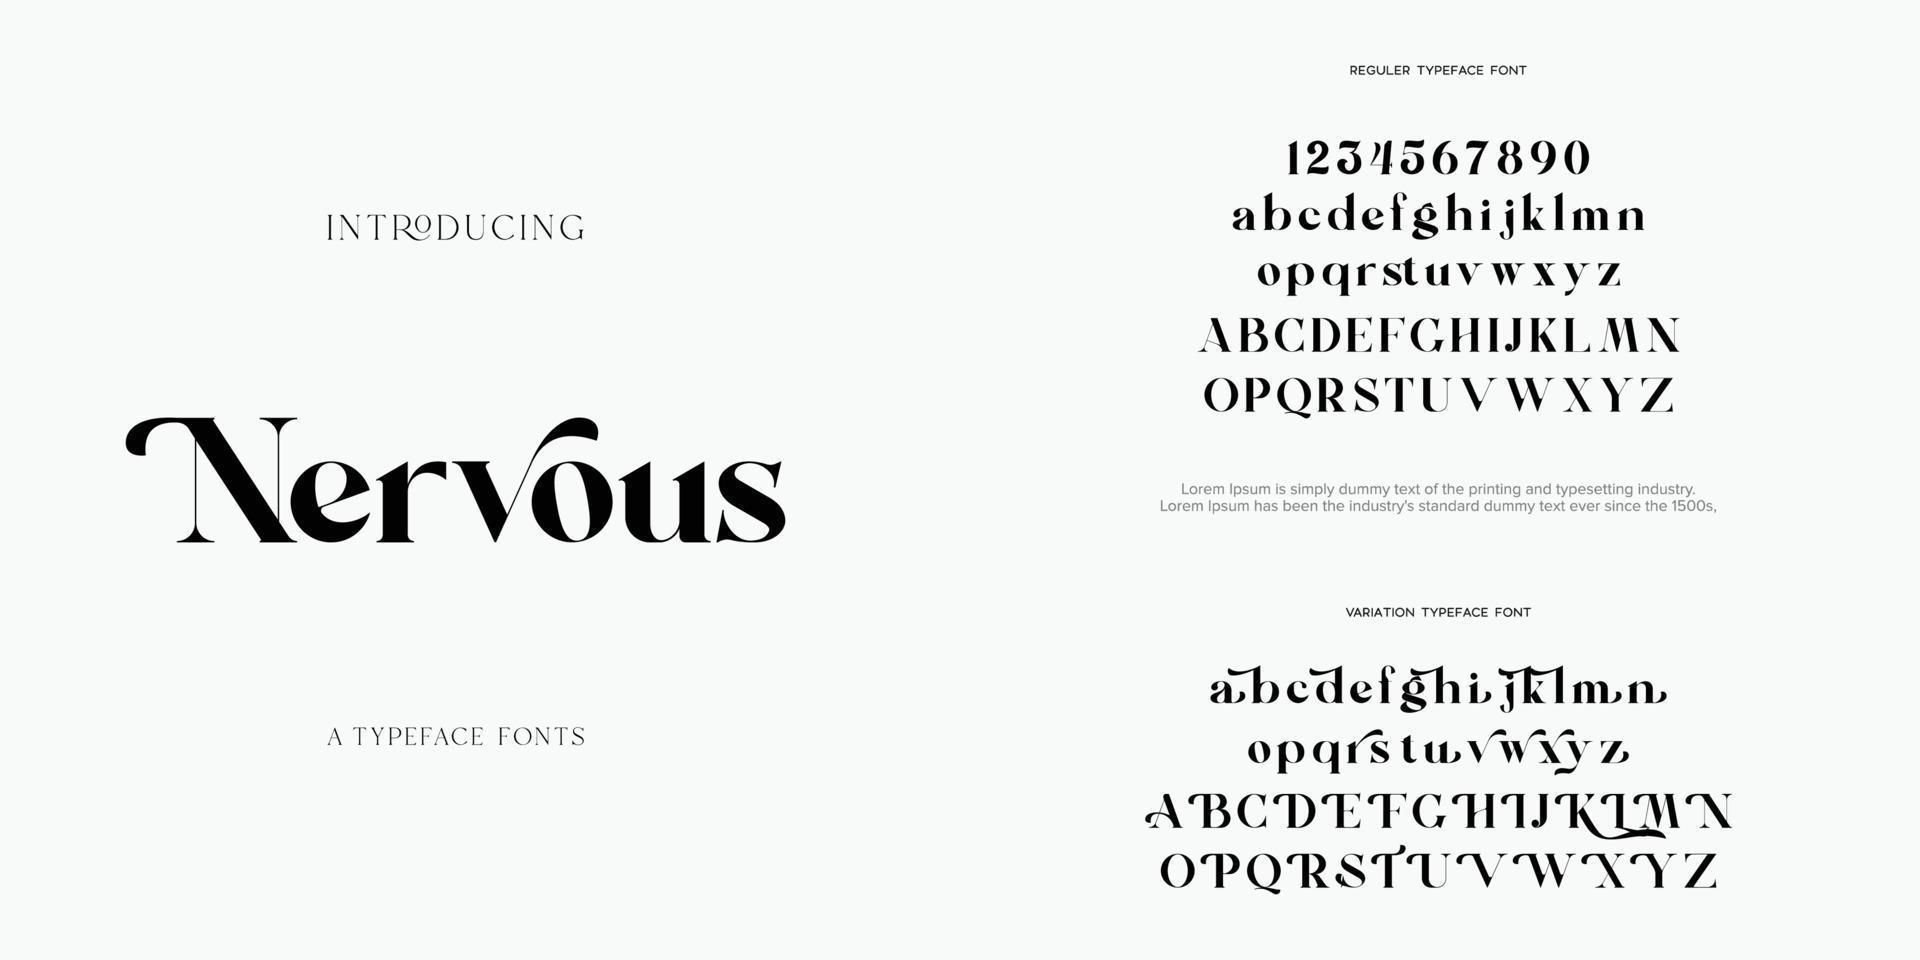 Nervous Abstract Fashion font alphabet. Minimal modern urban fonts for logo, brand etc. Typography typeface uppercase lowercase and number. vector illustration